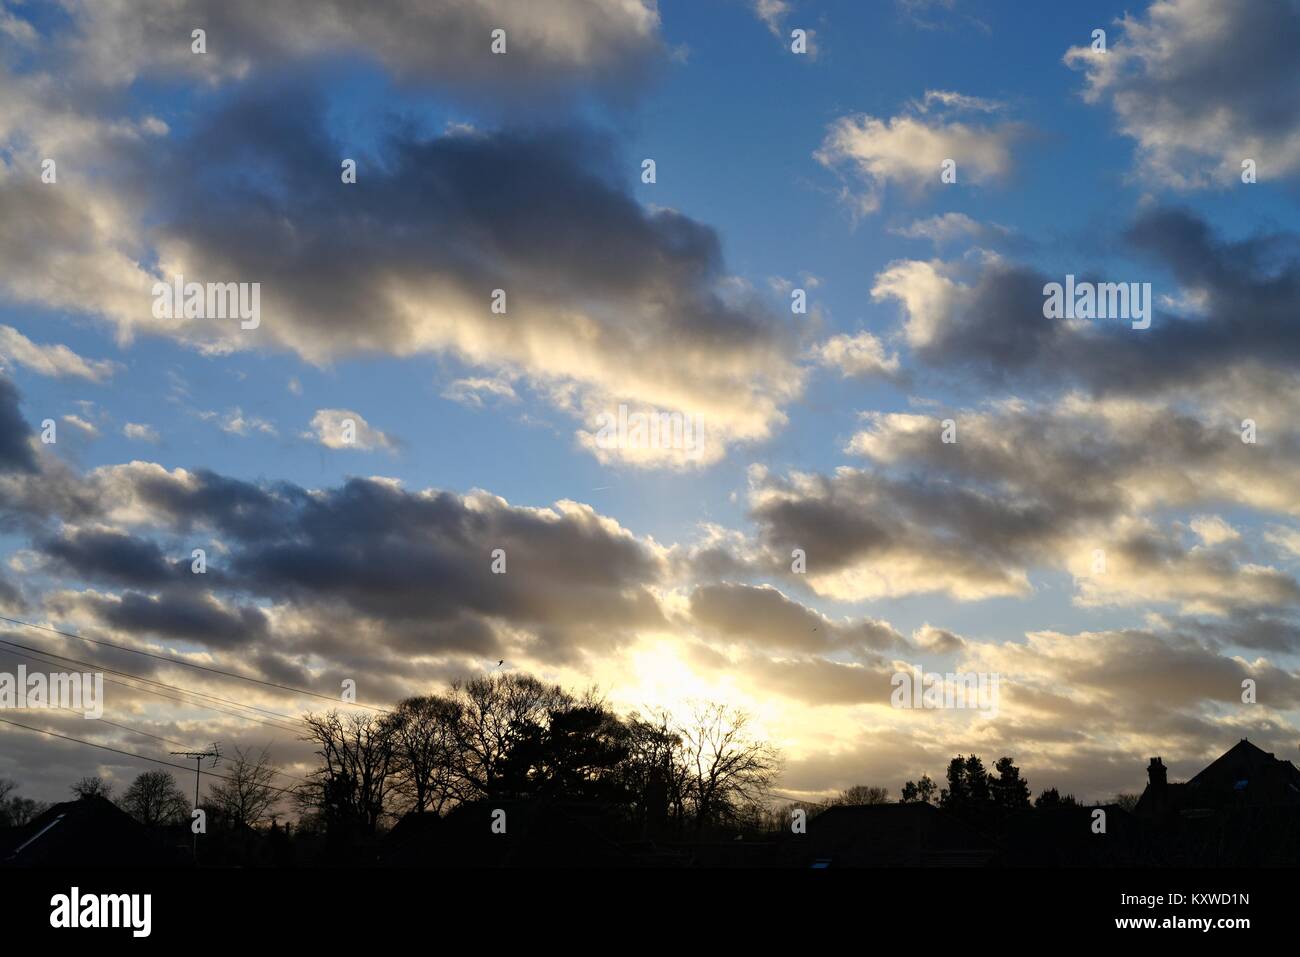 Dramatic cloud formation on winter's day sunset Stock Photo